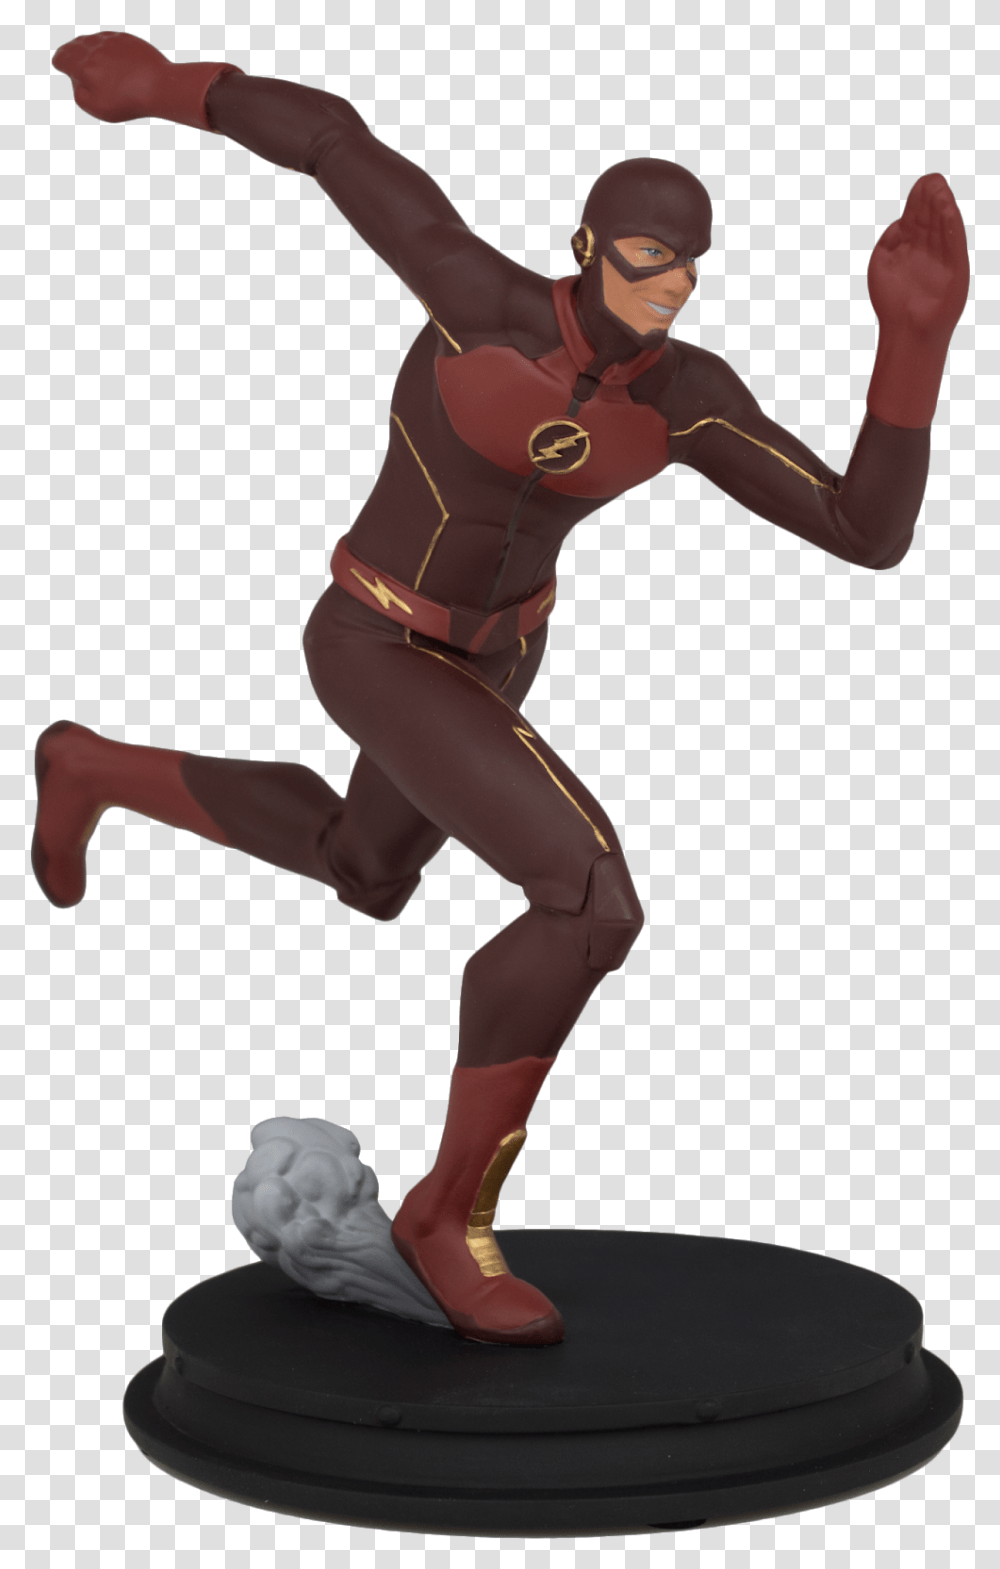 Animated Arrow And Flash Statues From Icon Heroes Flash Statue, Person, Clothing, Ninja, Dance Pose Transparent Png